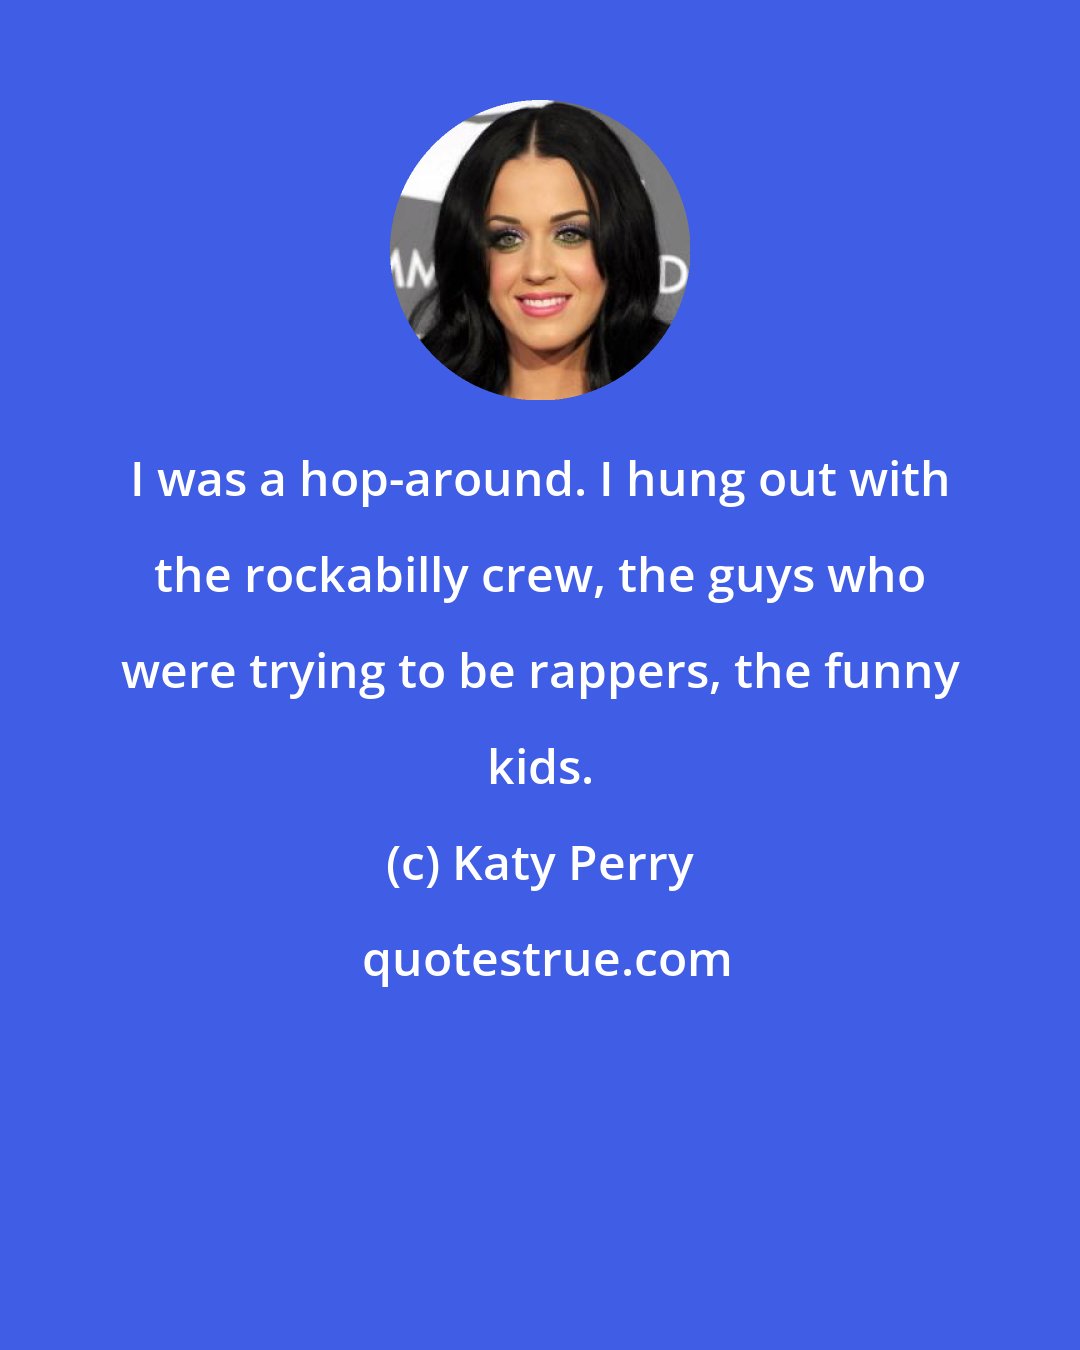 Katy Perry: I was a hop-around. I hung out with the rockabilly crew, the guys who were trying to be rappers, the funny kids.